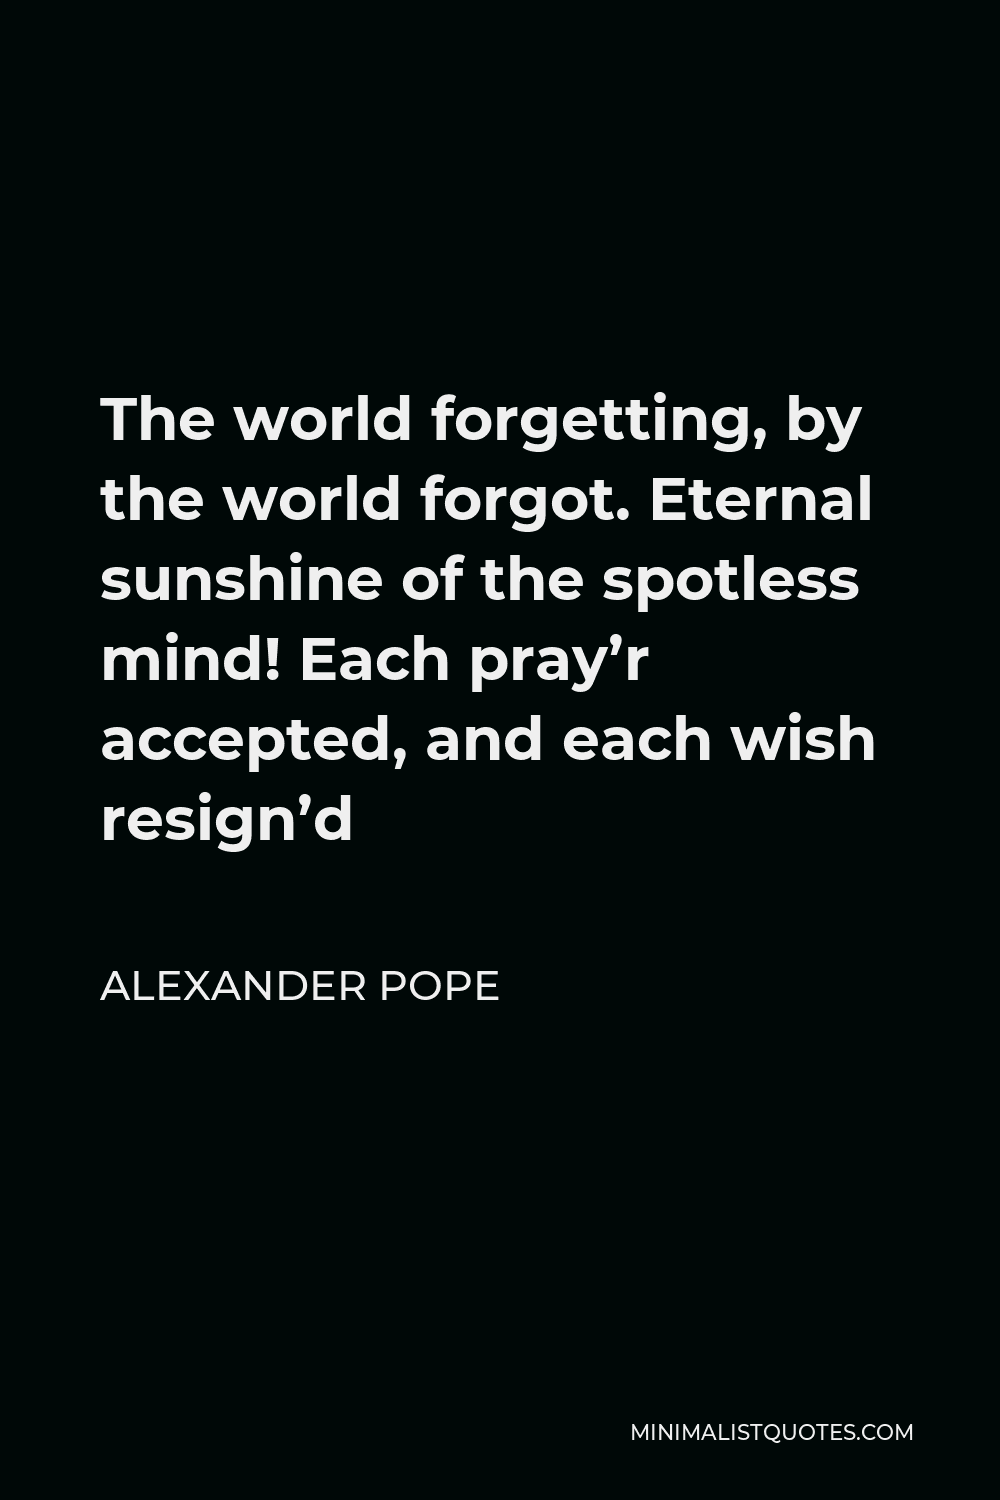 Pope Quote: The world forgetting, by the world forgot. sunshine of the spotless mind! Each pray'r accepted, each wish resign'd